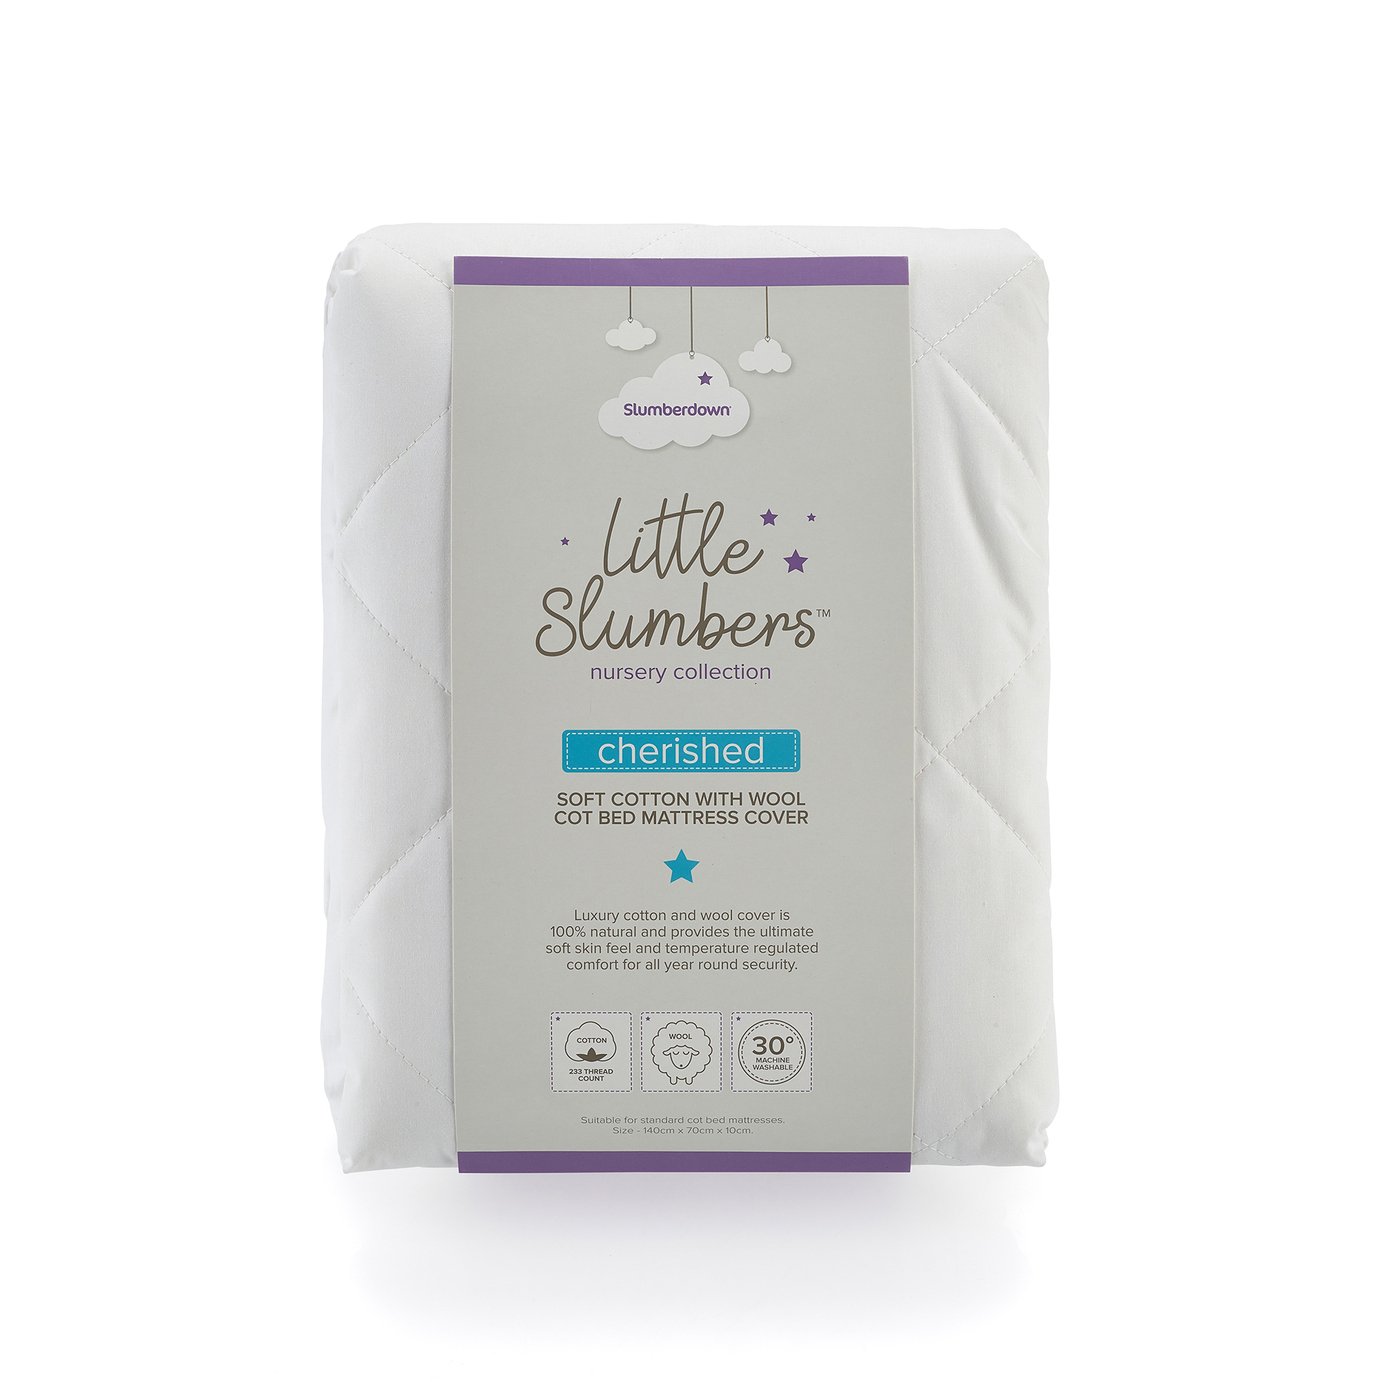 Slumberdown Cherished Cotton & Wool Cot Bed Mattress Cover Review